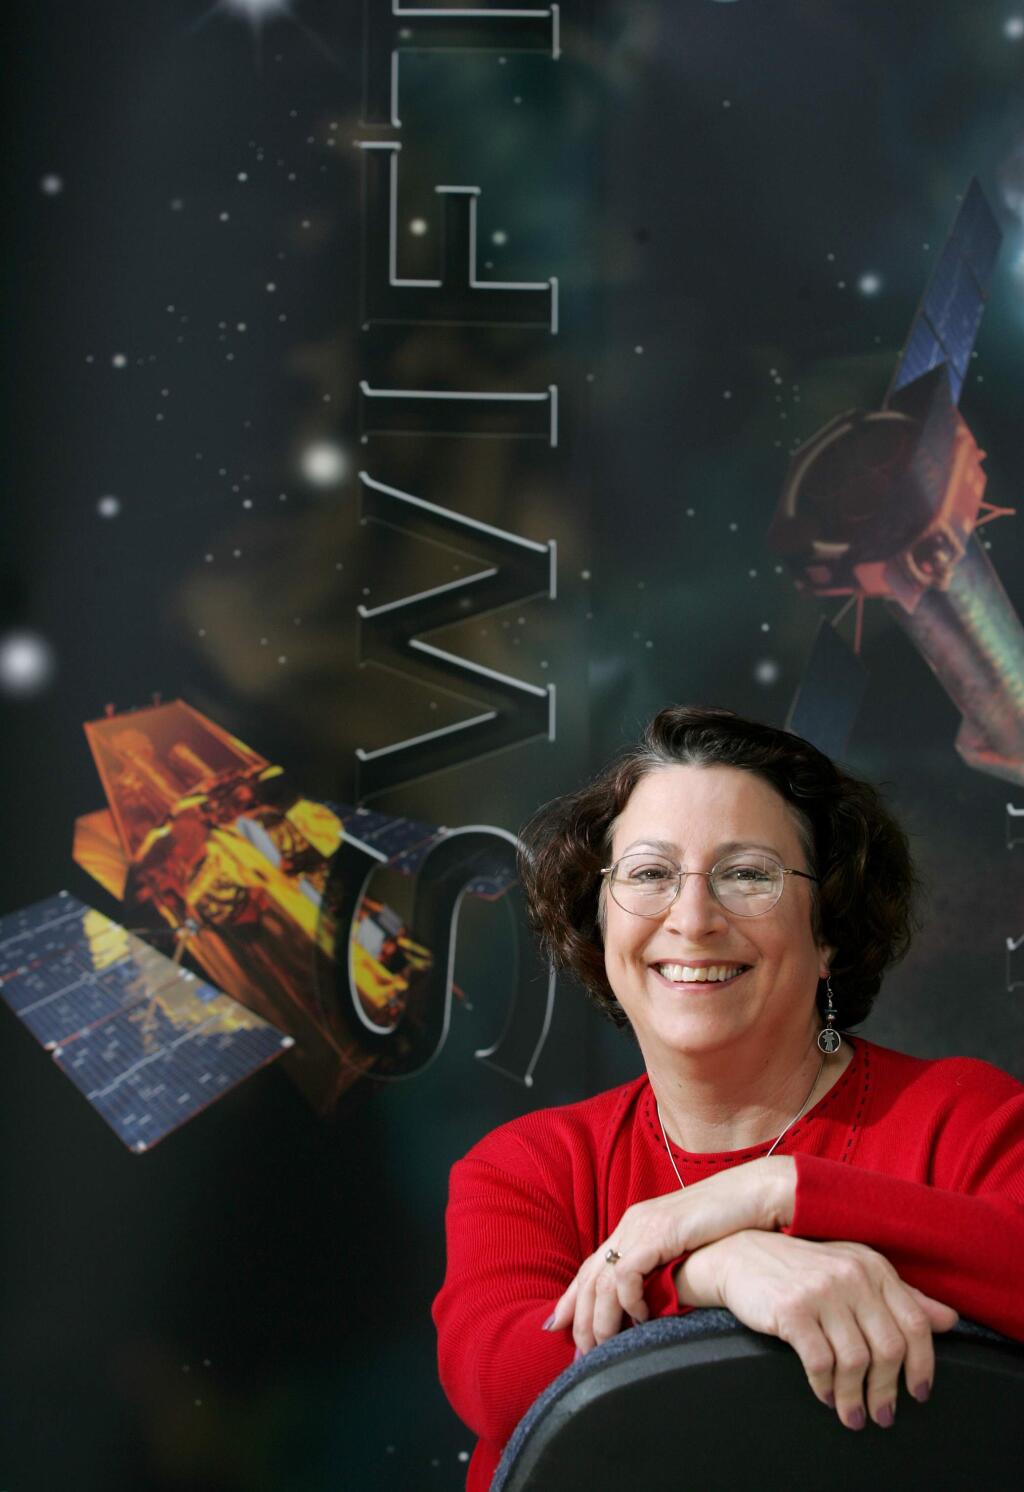 4/17/2005: D1: Sonoma State University professor Lynn Cominsky is an MIT-trained astrophysicist and a NASA adviser. She is program director for a NASA program that aims to explain the science of the universe to students, particularly in connection with the gamma-ray detecting Swift satellite, launched last year.PC: Photo by Christopher Chung/ The Press Democrat SSU Professor Lynn Cominsky is the program director for NASA's Edication Public Outreach program.